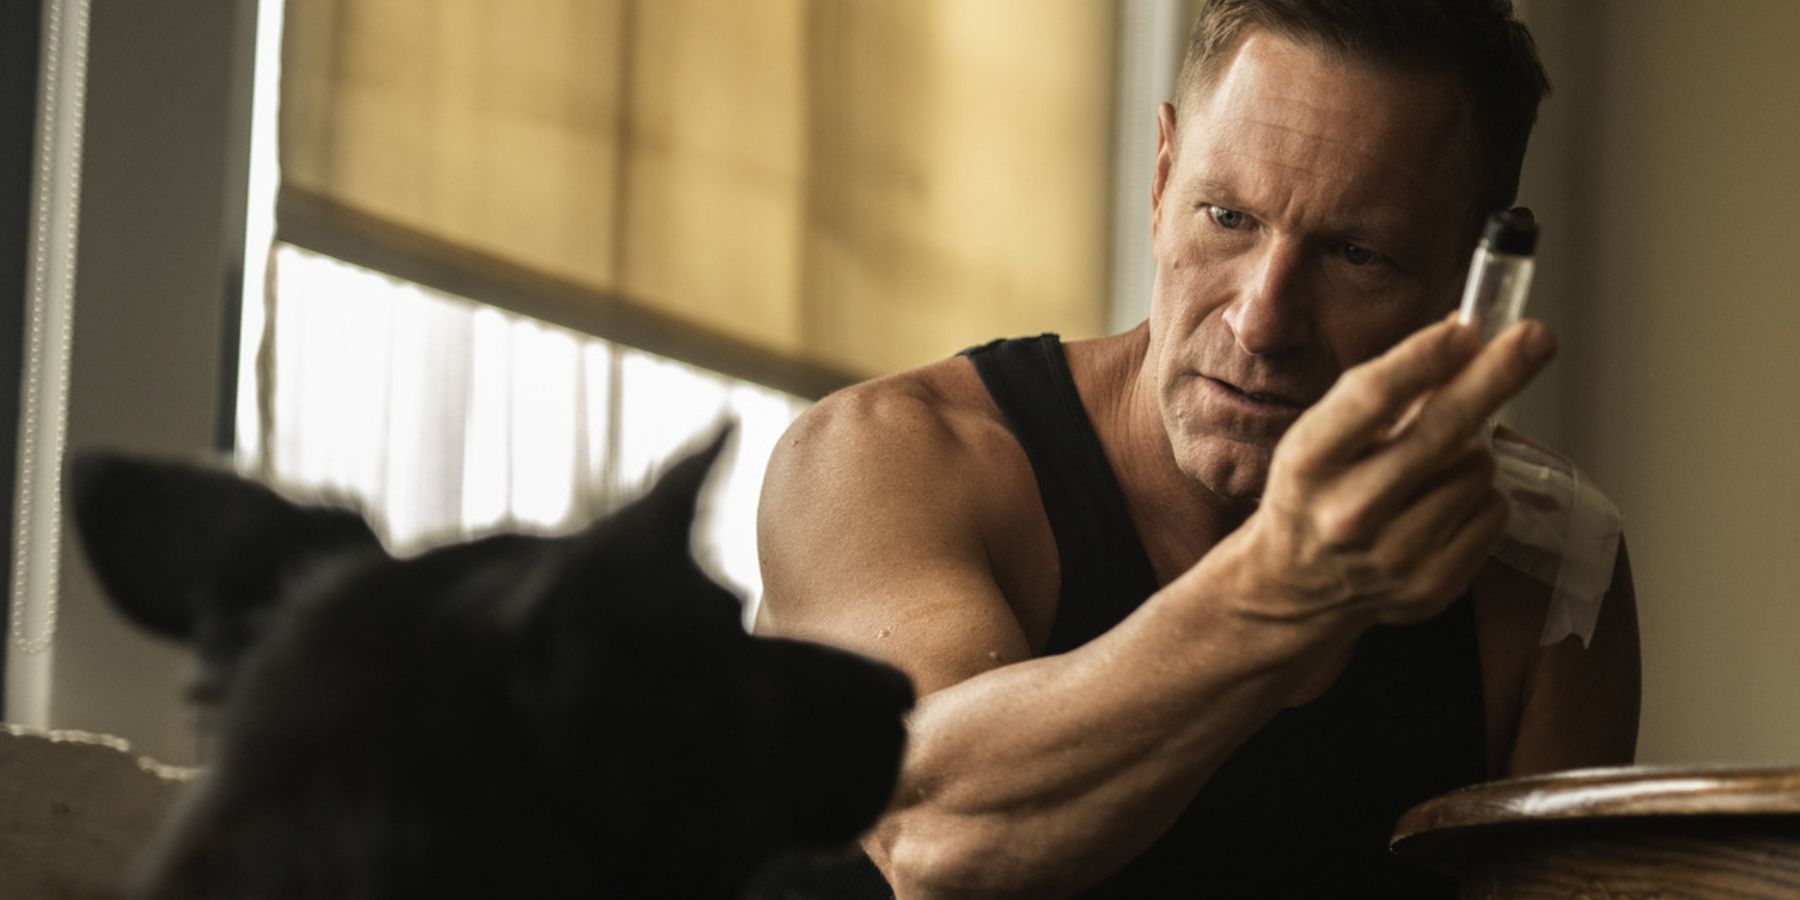 If you miss John Wick and his love of dogs, watch this action film by Aaron Eckhart